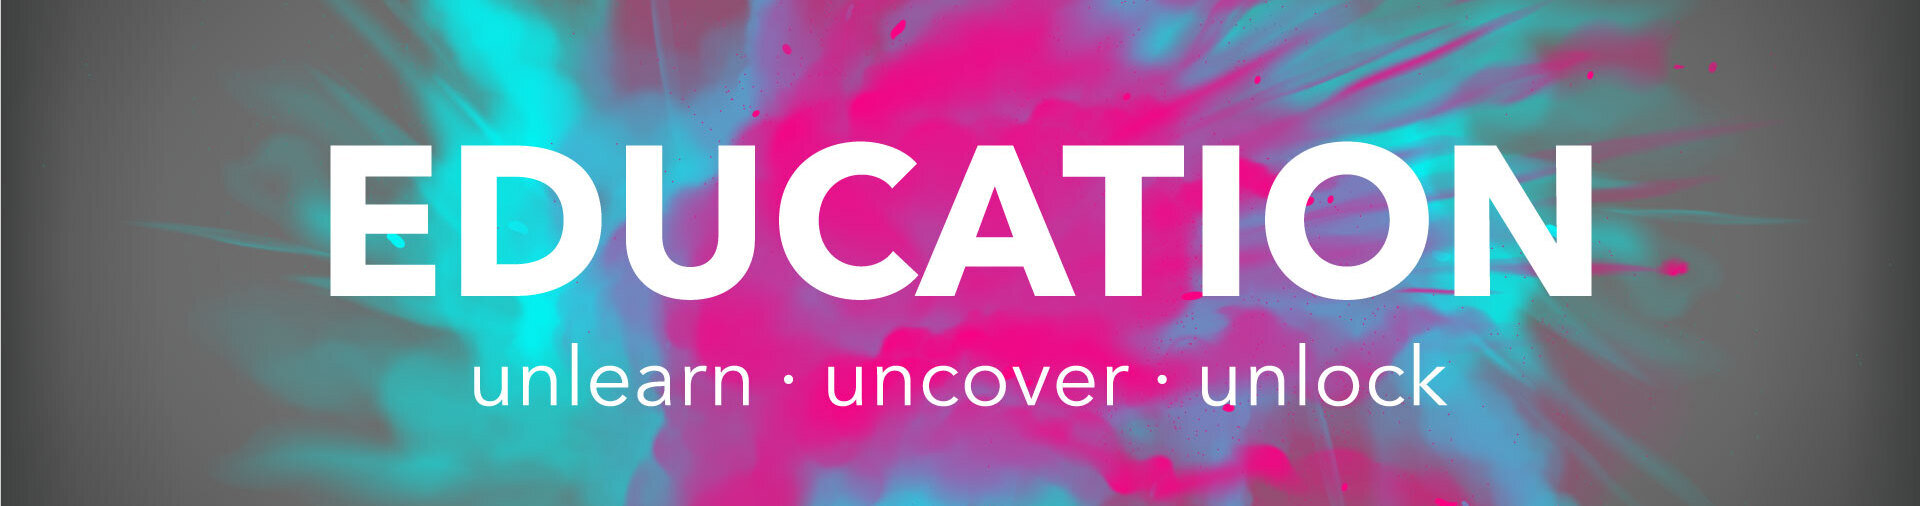 EDUCATION: Unlearn | Uncover | Unlock's background image'